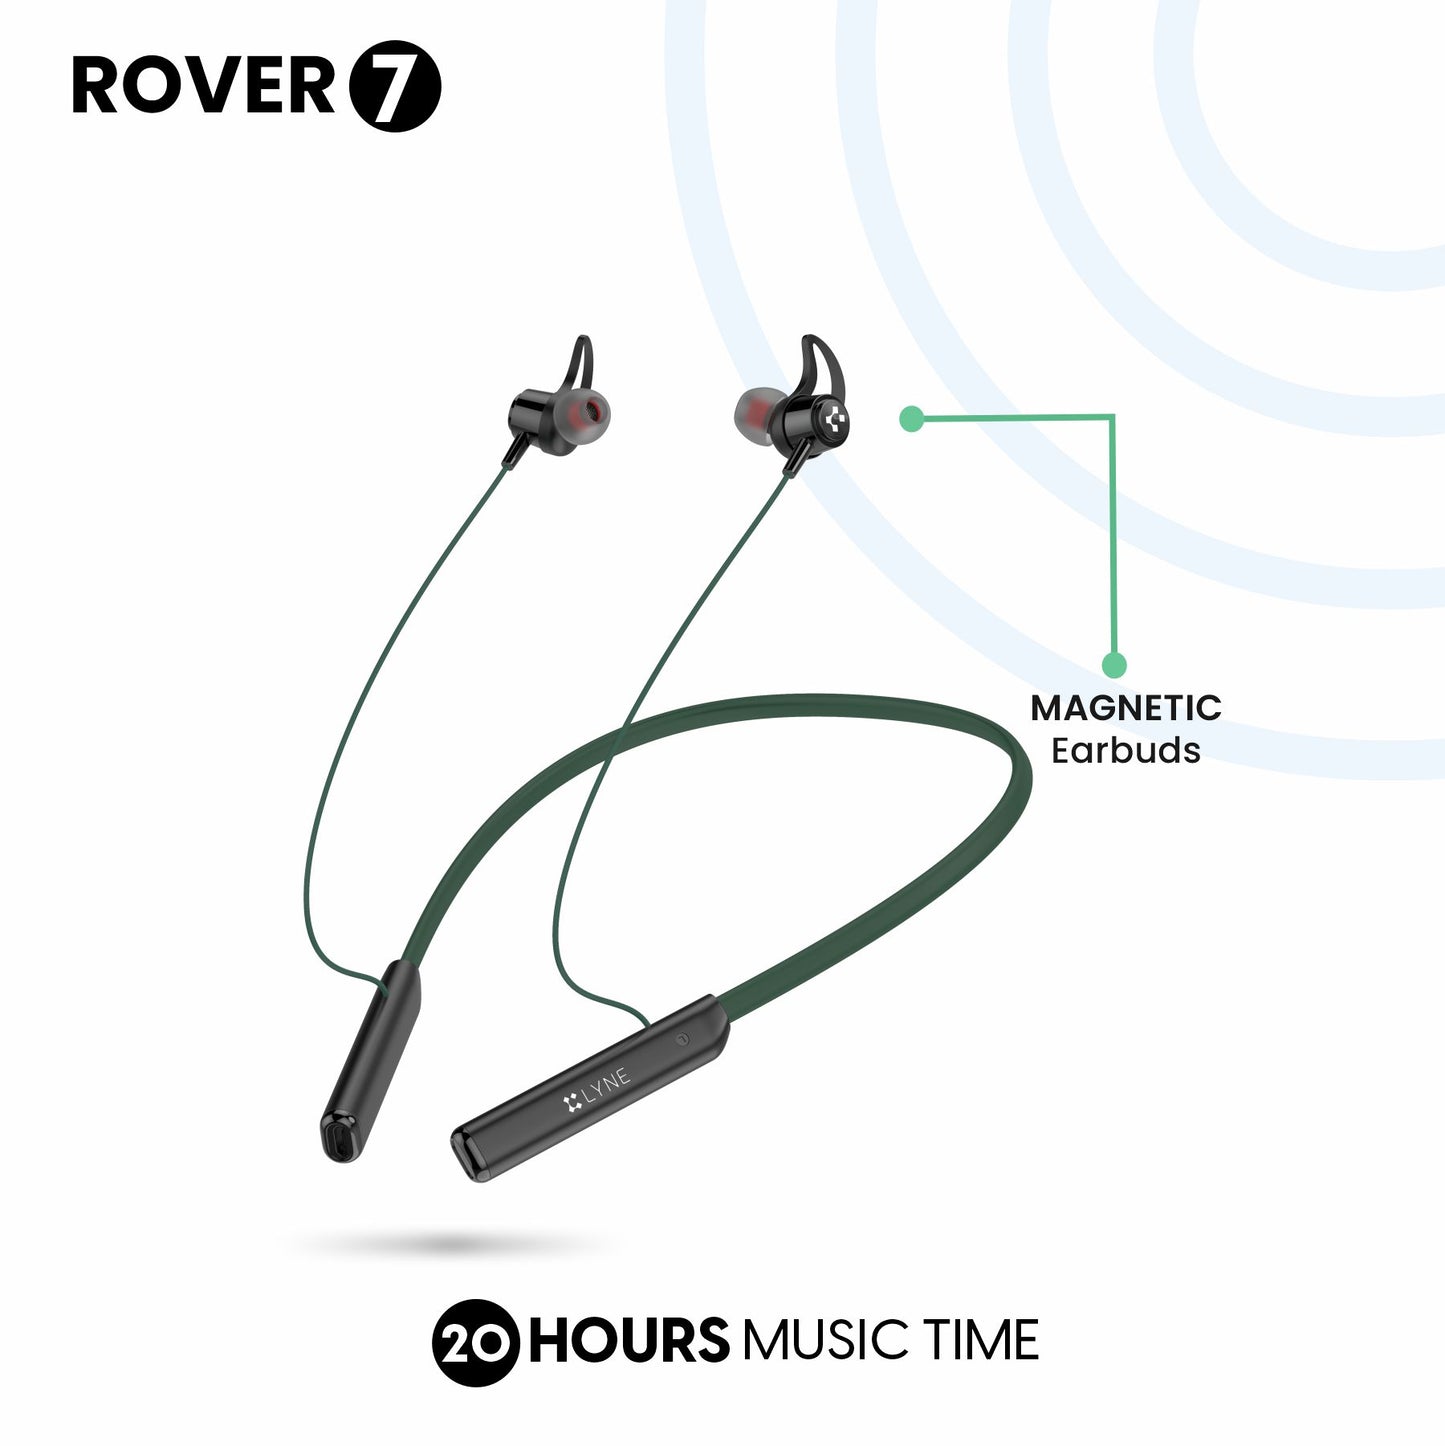 LYNE Rover 7 20 Hours Music Time Bluetooth Neckband with Magnetic Earbuds & Mic